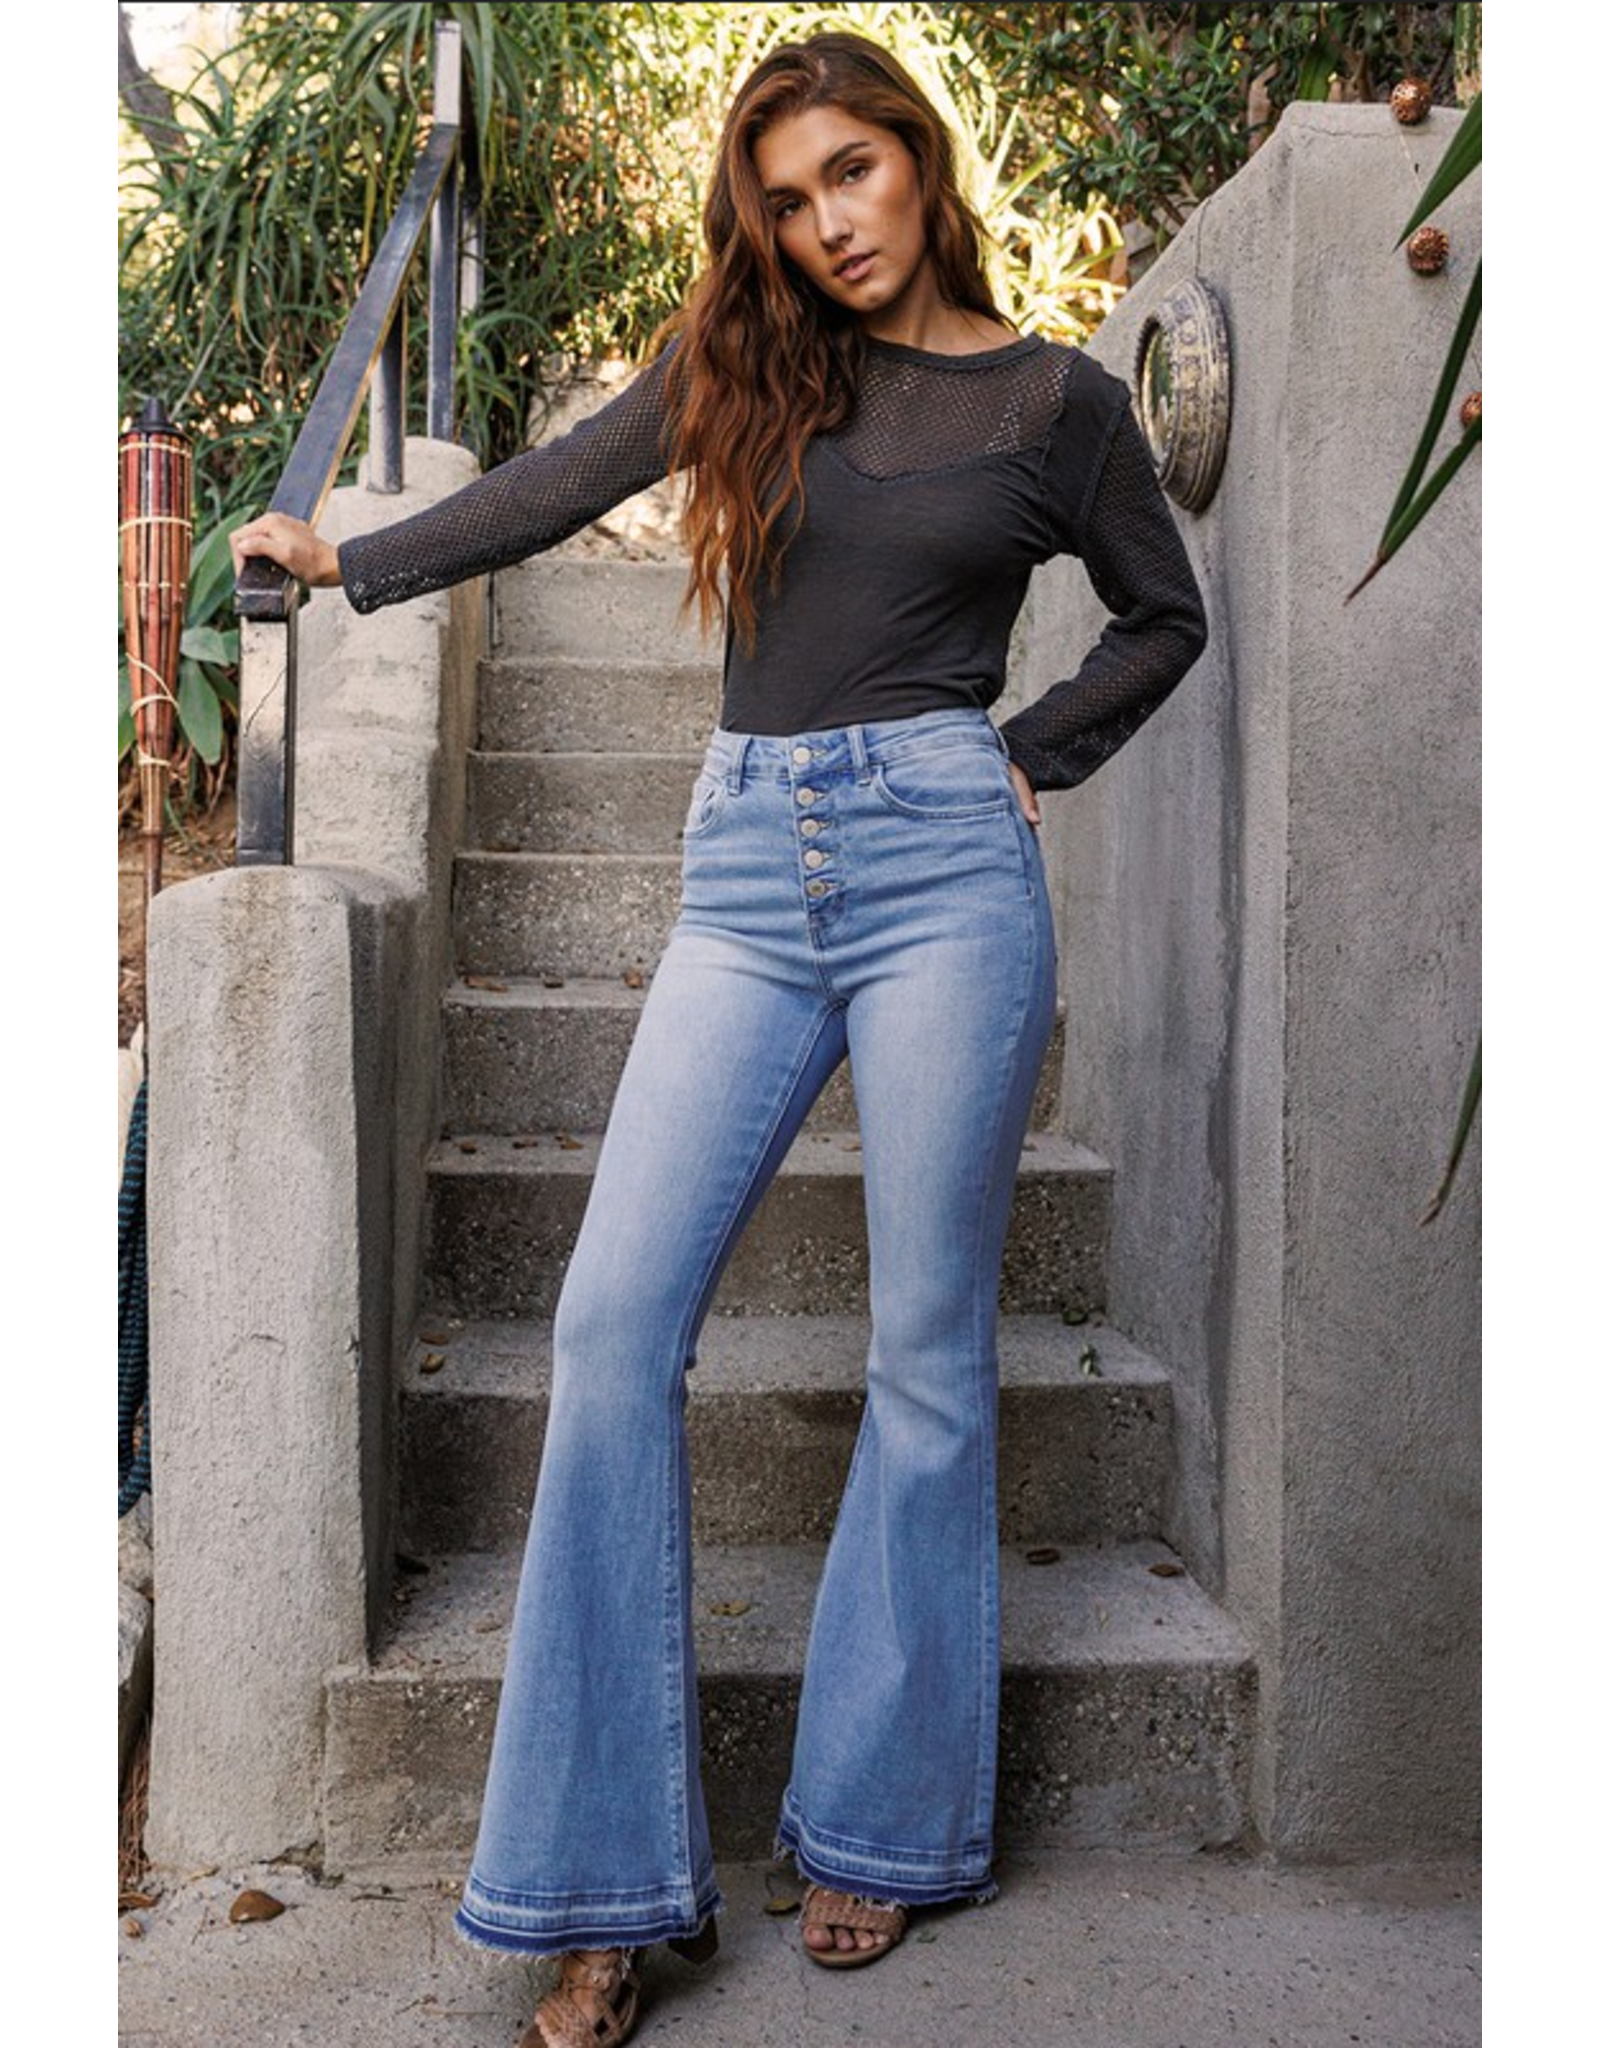 90's Super High Rise Loose Fit Jeans from Vervet by Flying Monkey